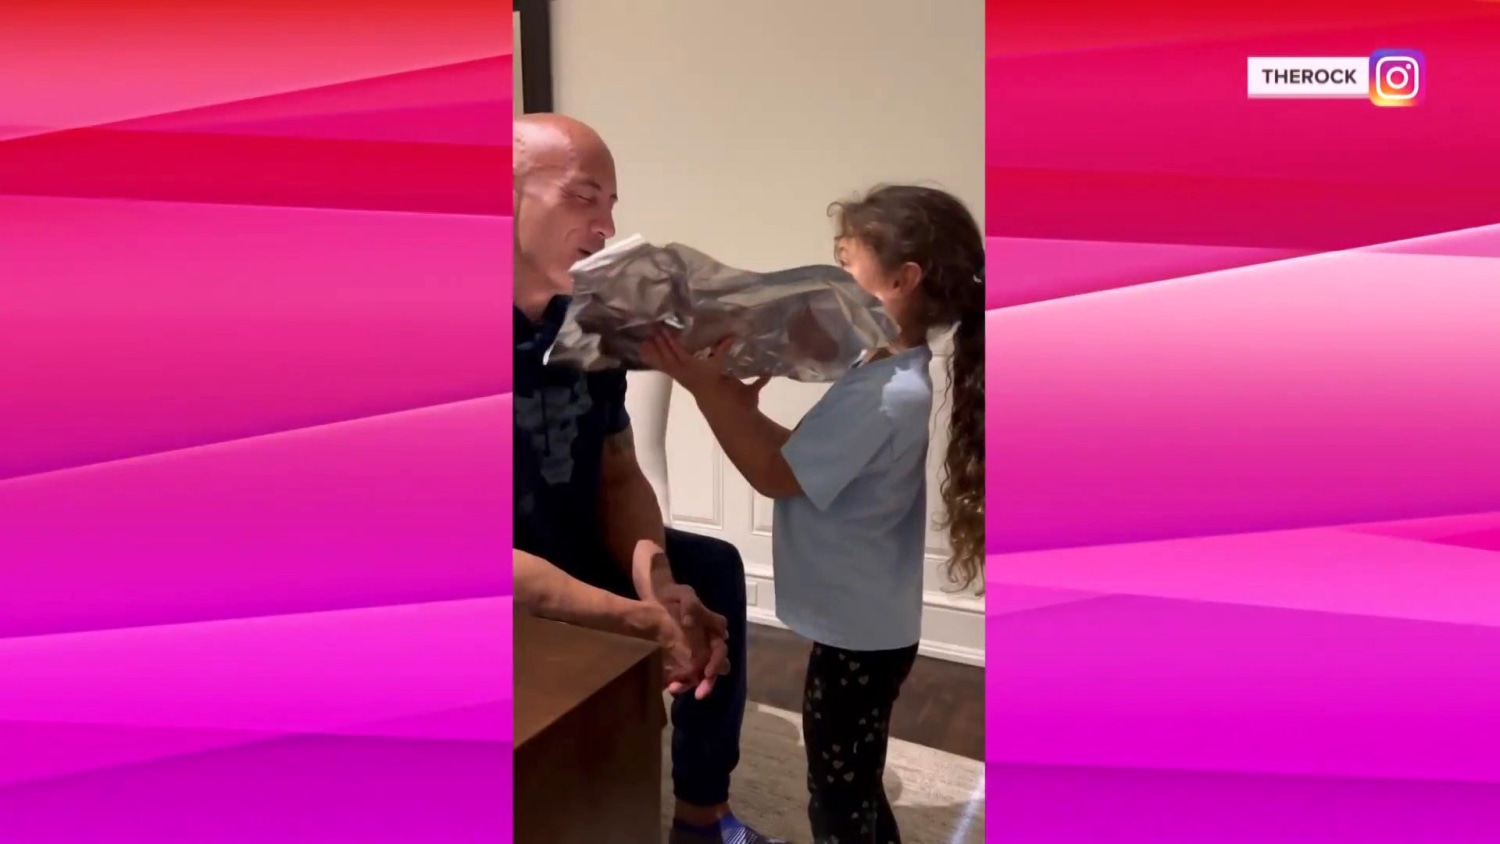 Watch: Dwayne Johnson gets pink face paint in daughters' makeover video